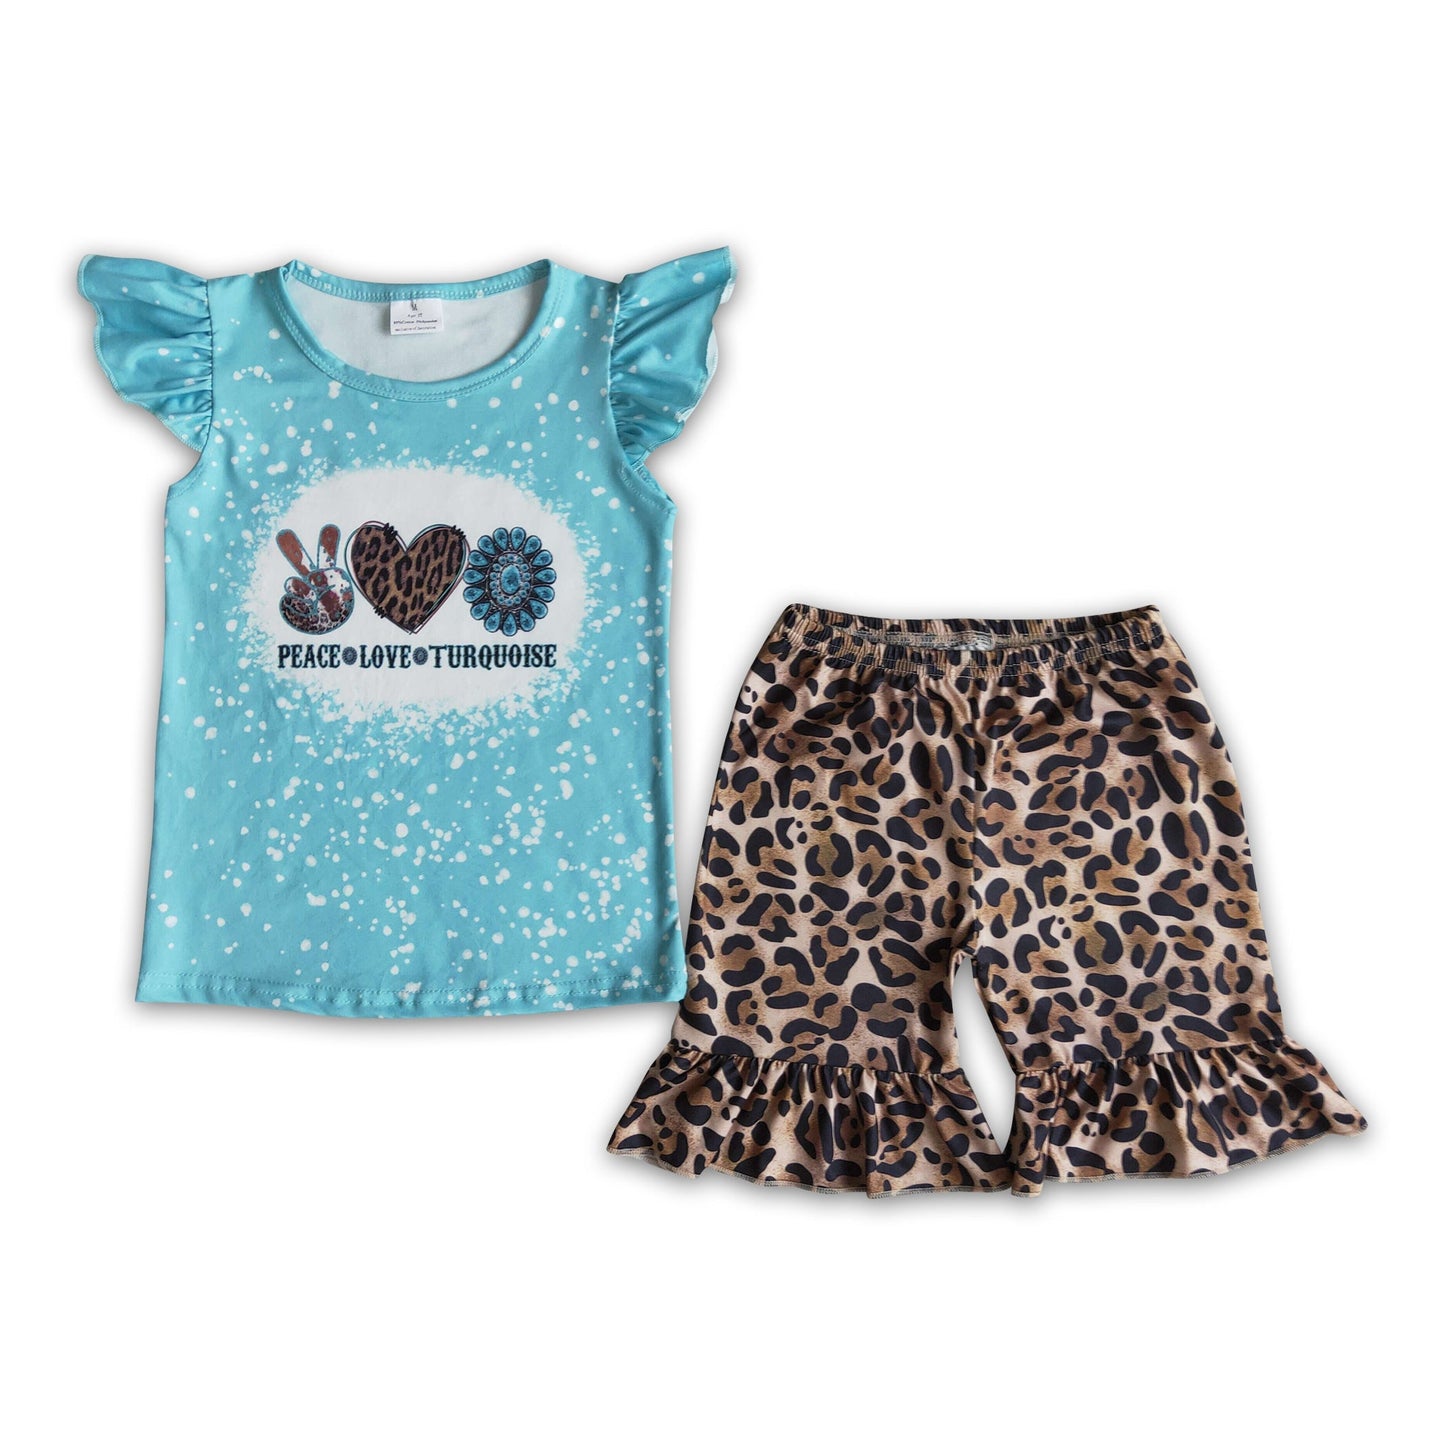 Peace love turquoise flutter sleeve leopard shorts girls summer outfits